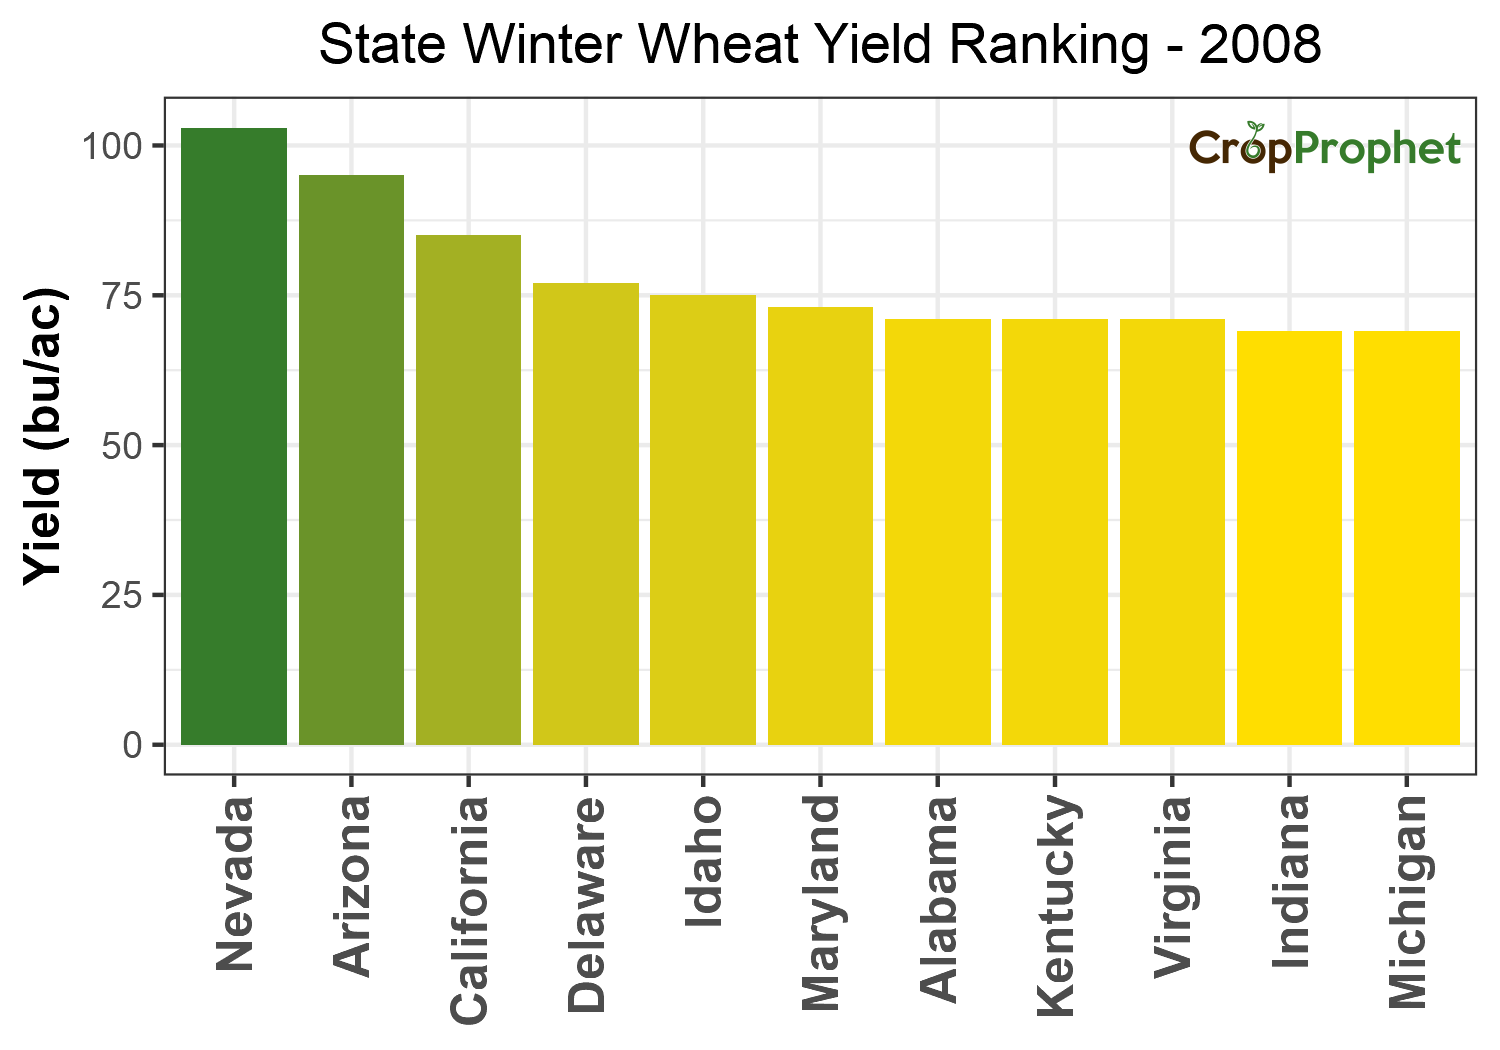 Winter wheat Production by State - 2008 Rankings